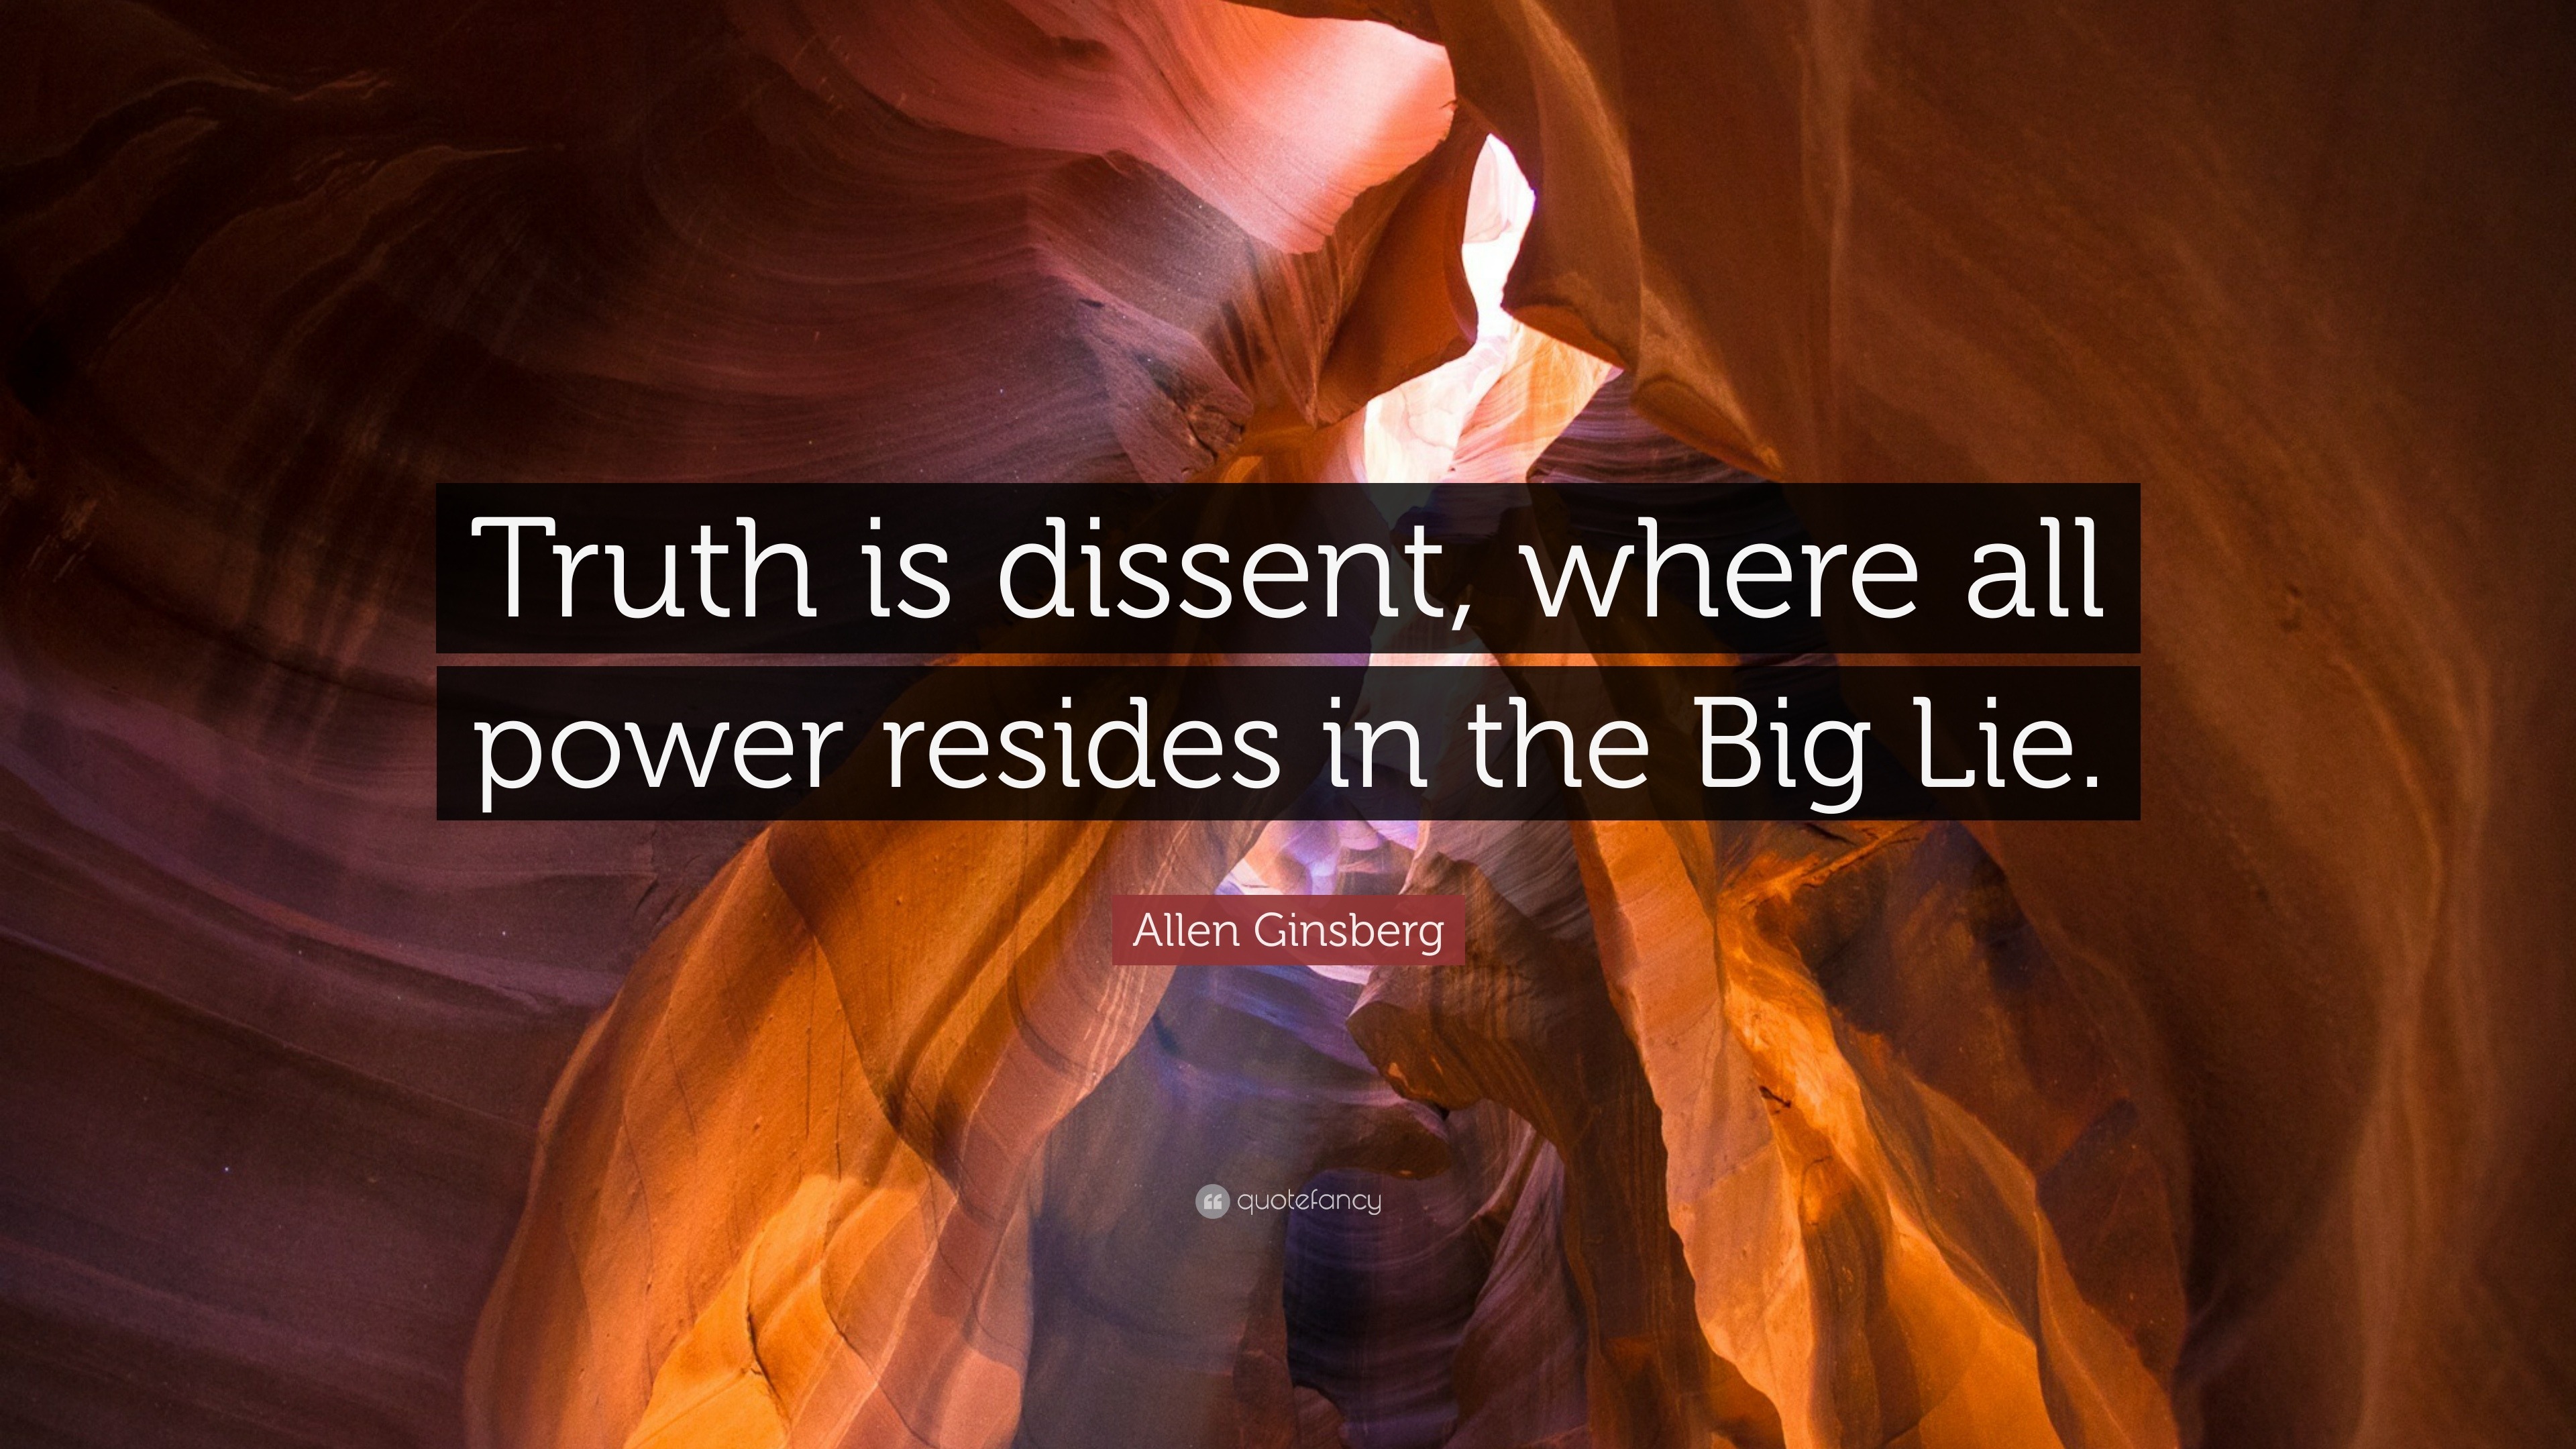 Allen Ginsberg Quote: “Truth is dissent, where all power resides in the Big Lie ...3840 x 2160